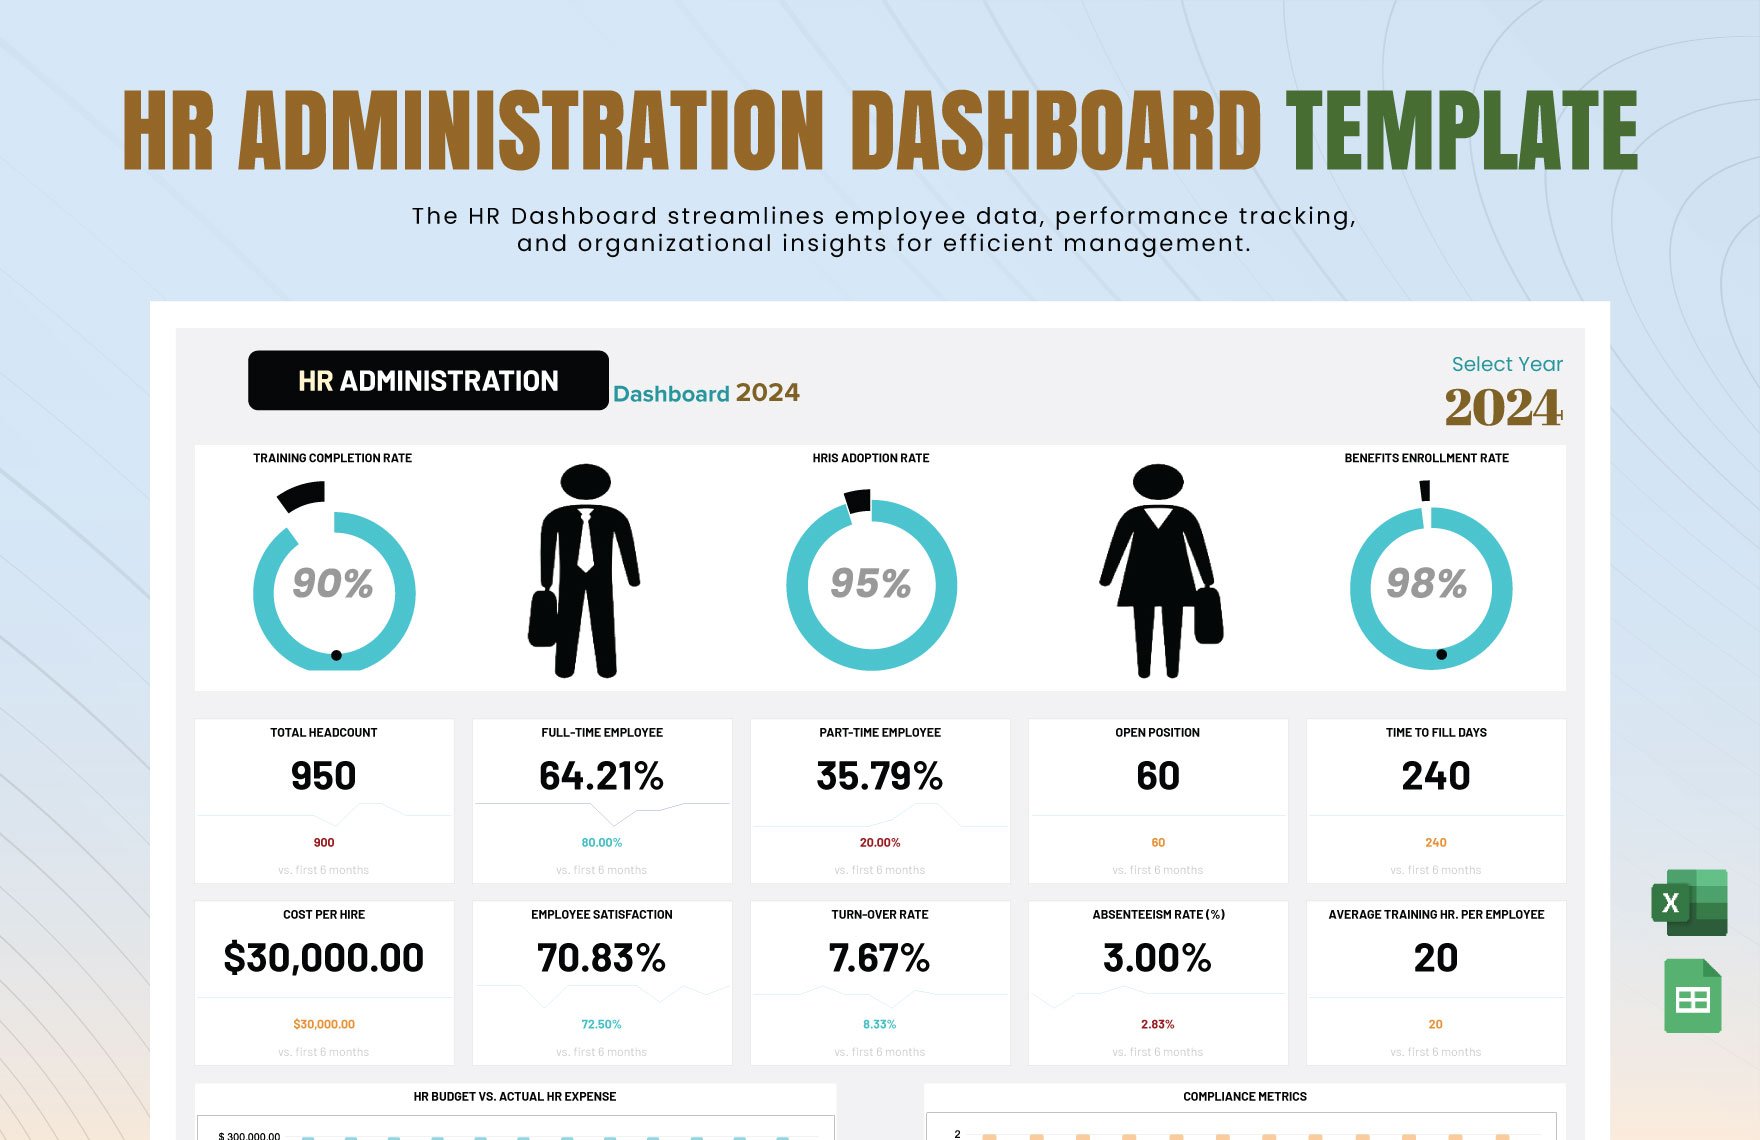 HR Administration Dashboard Template